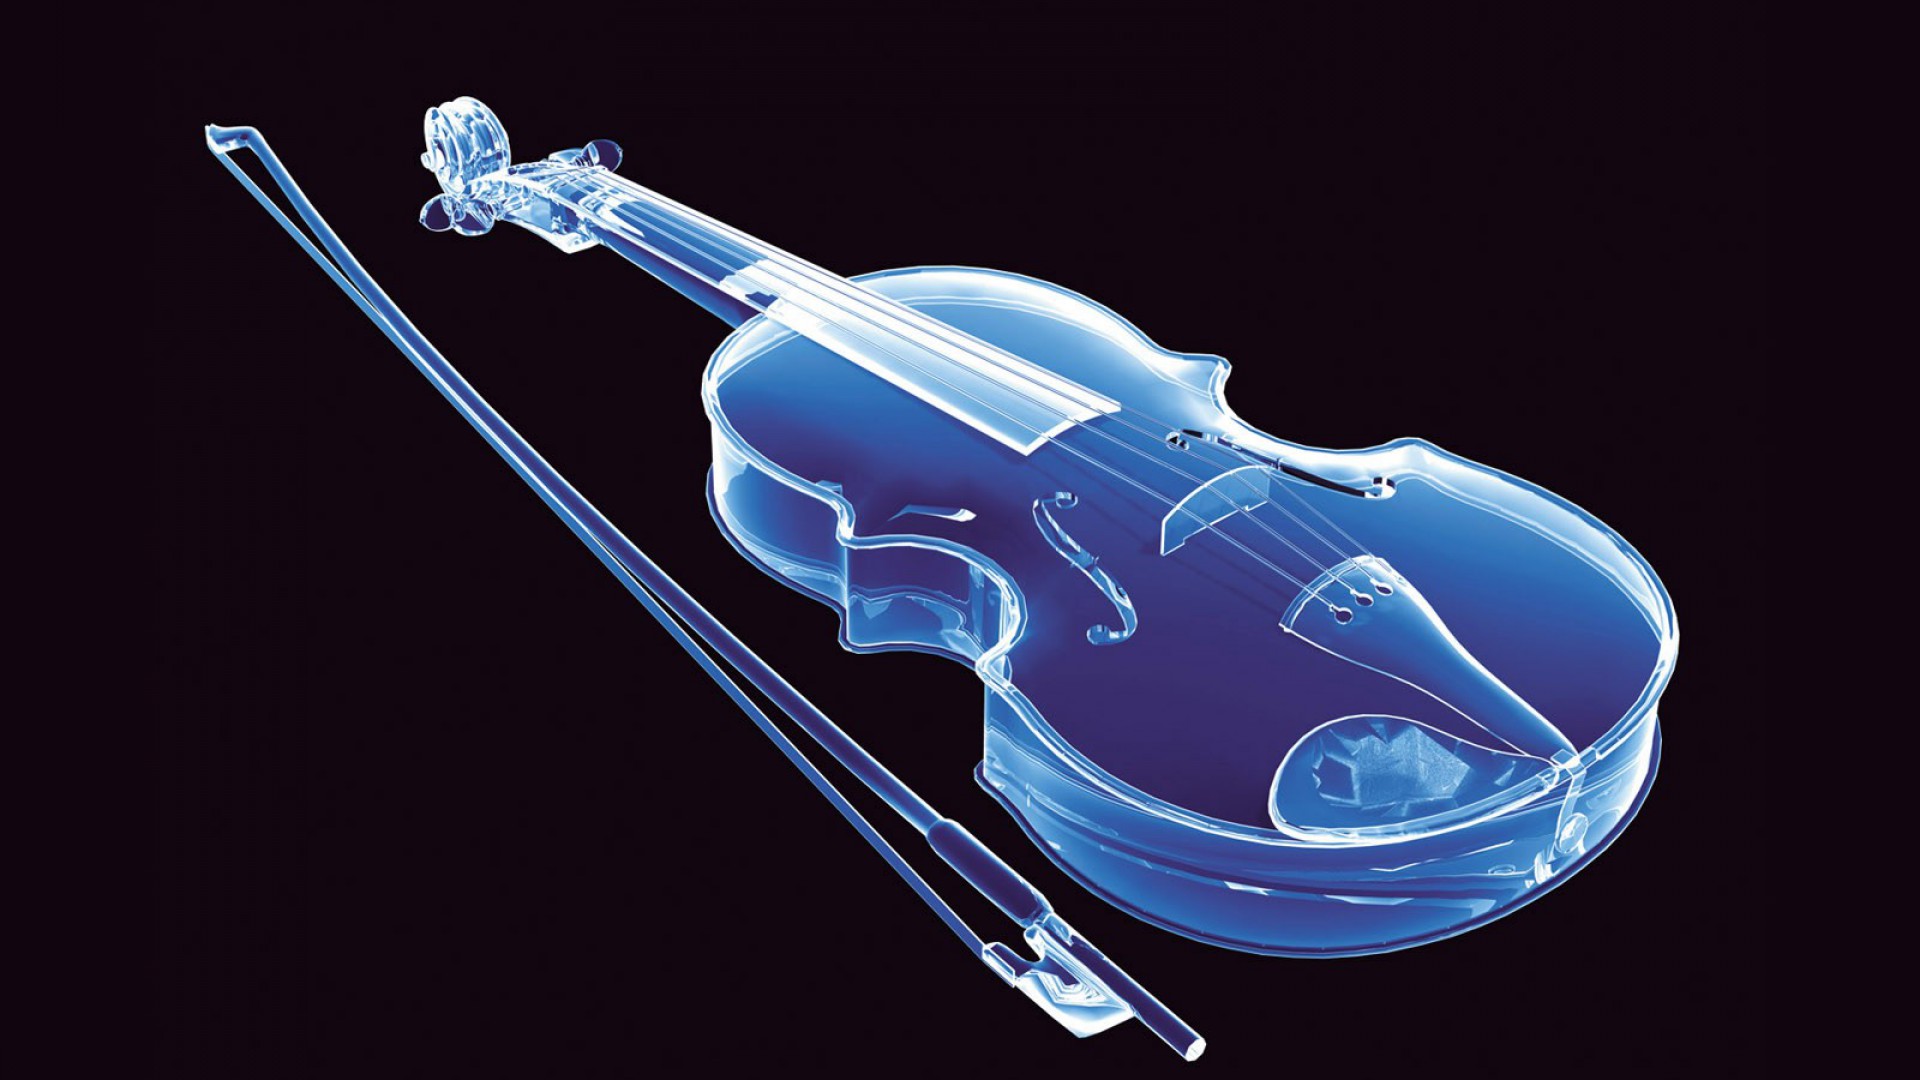 Music Artistic Violin Blue Abstract 1920x1080